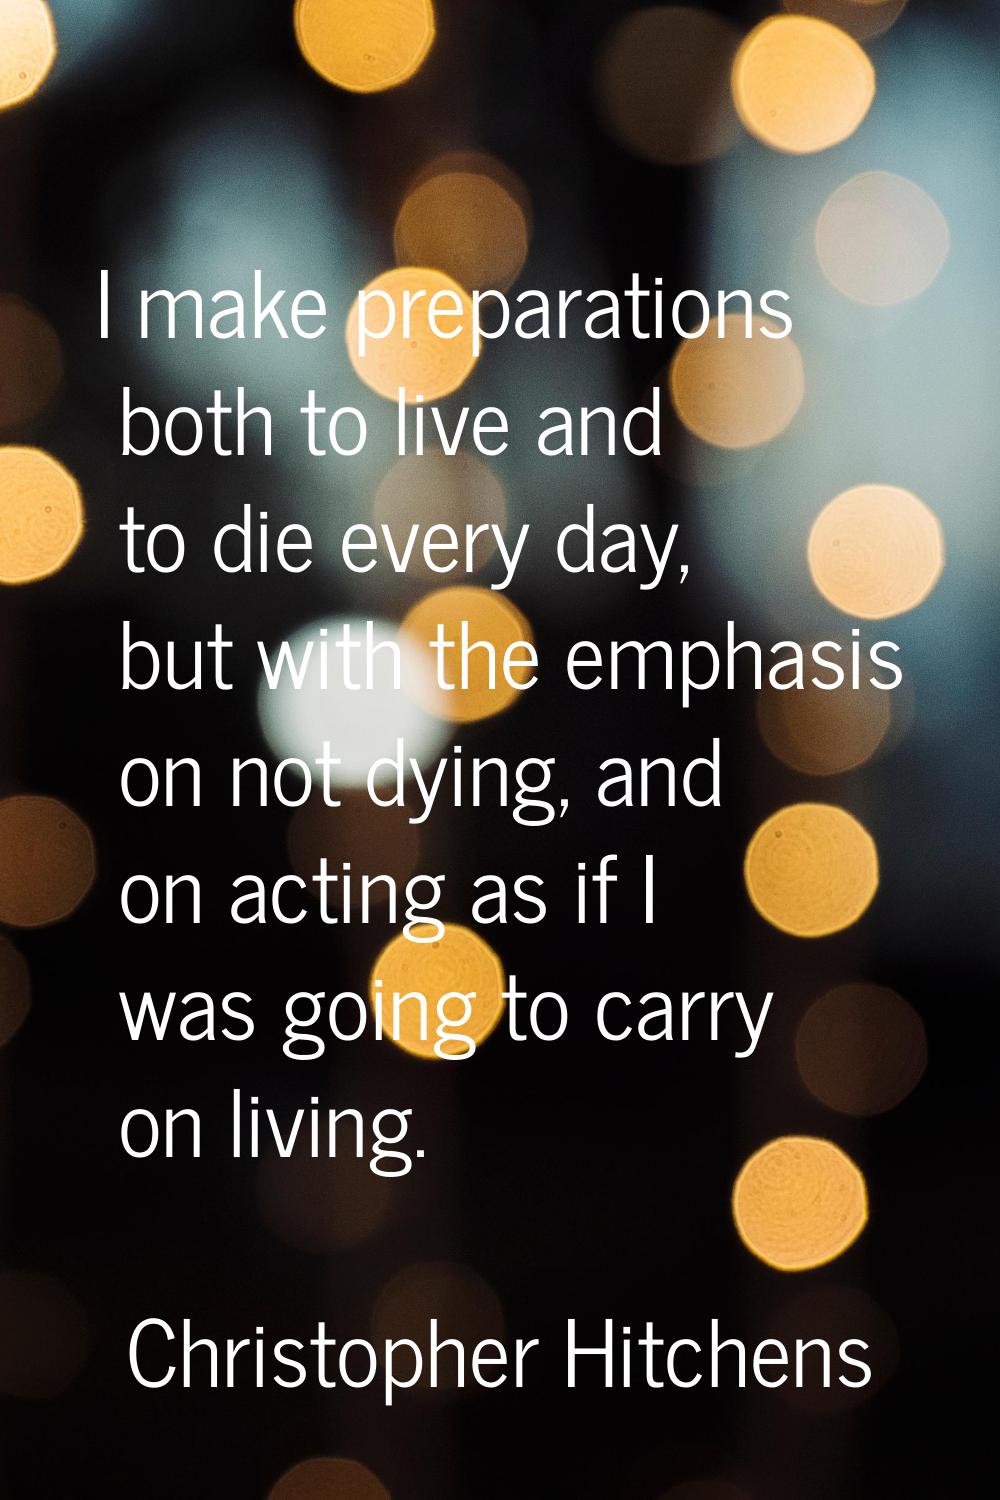 I make preparations both to live and to die every day, but with the emphasis on not dying, and on a